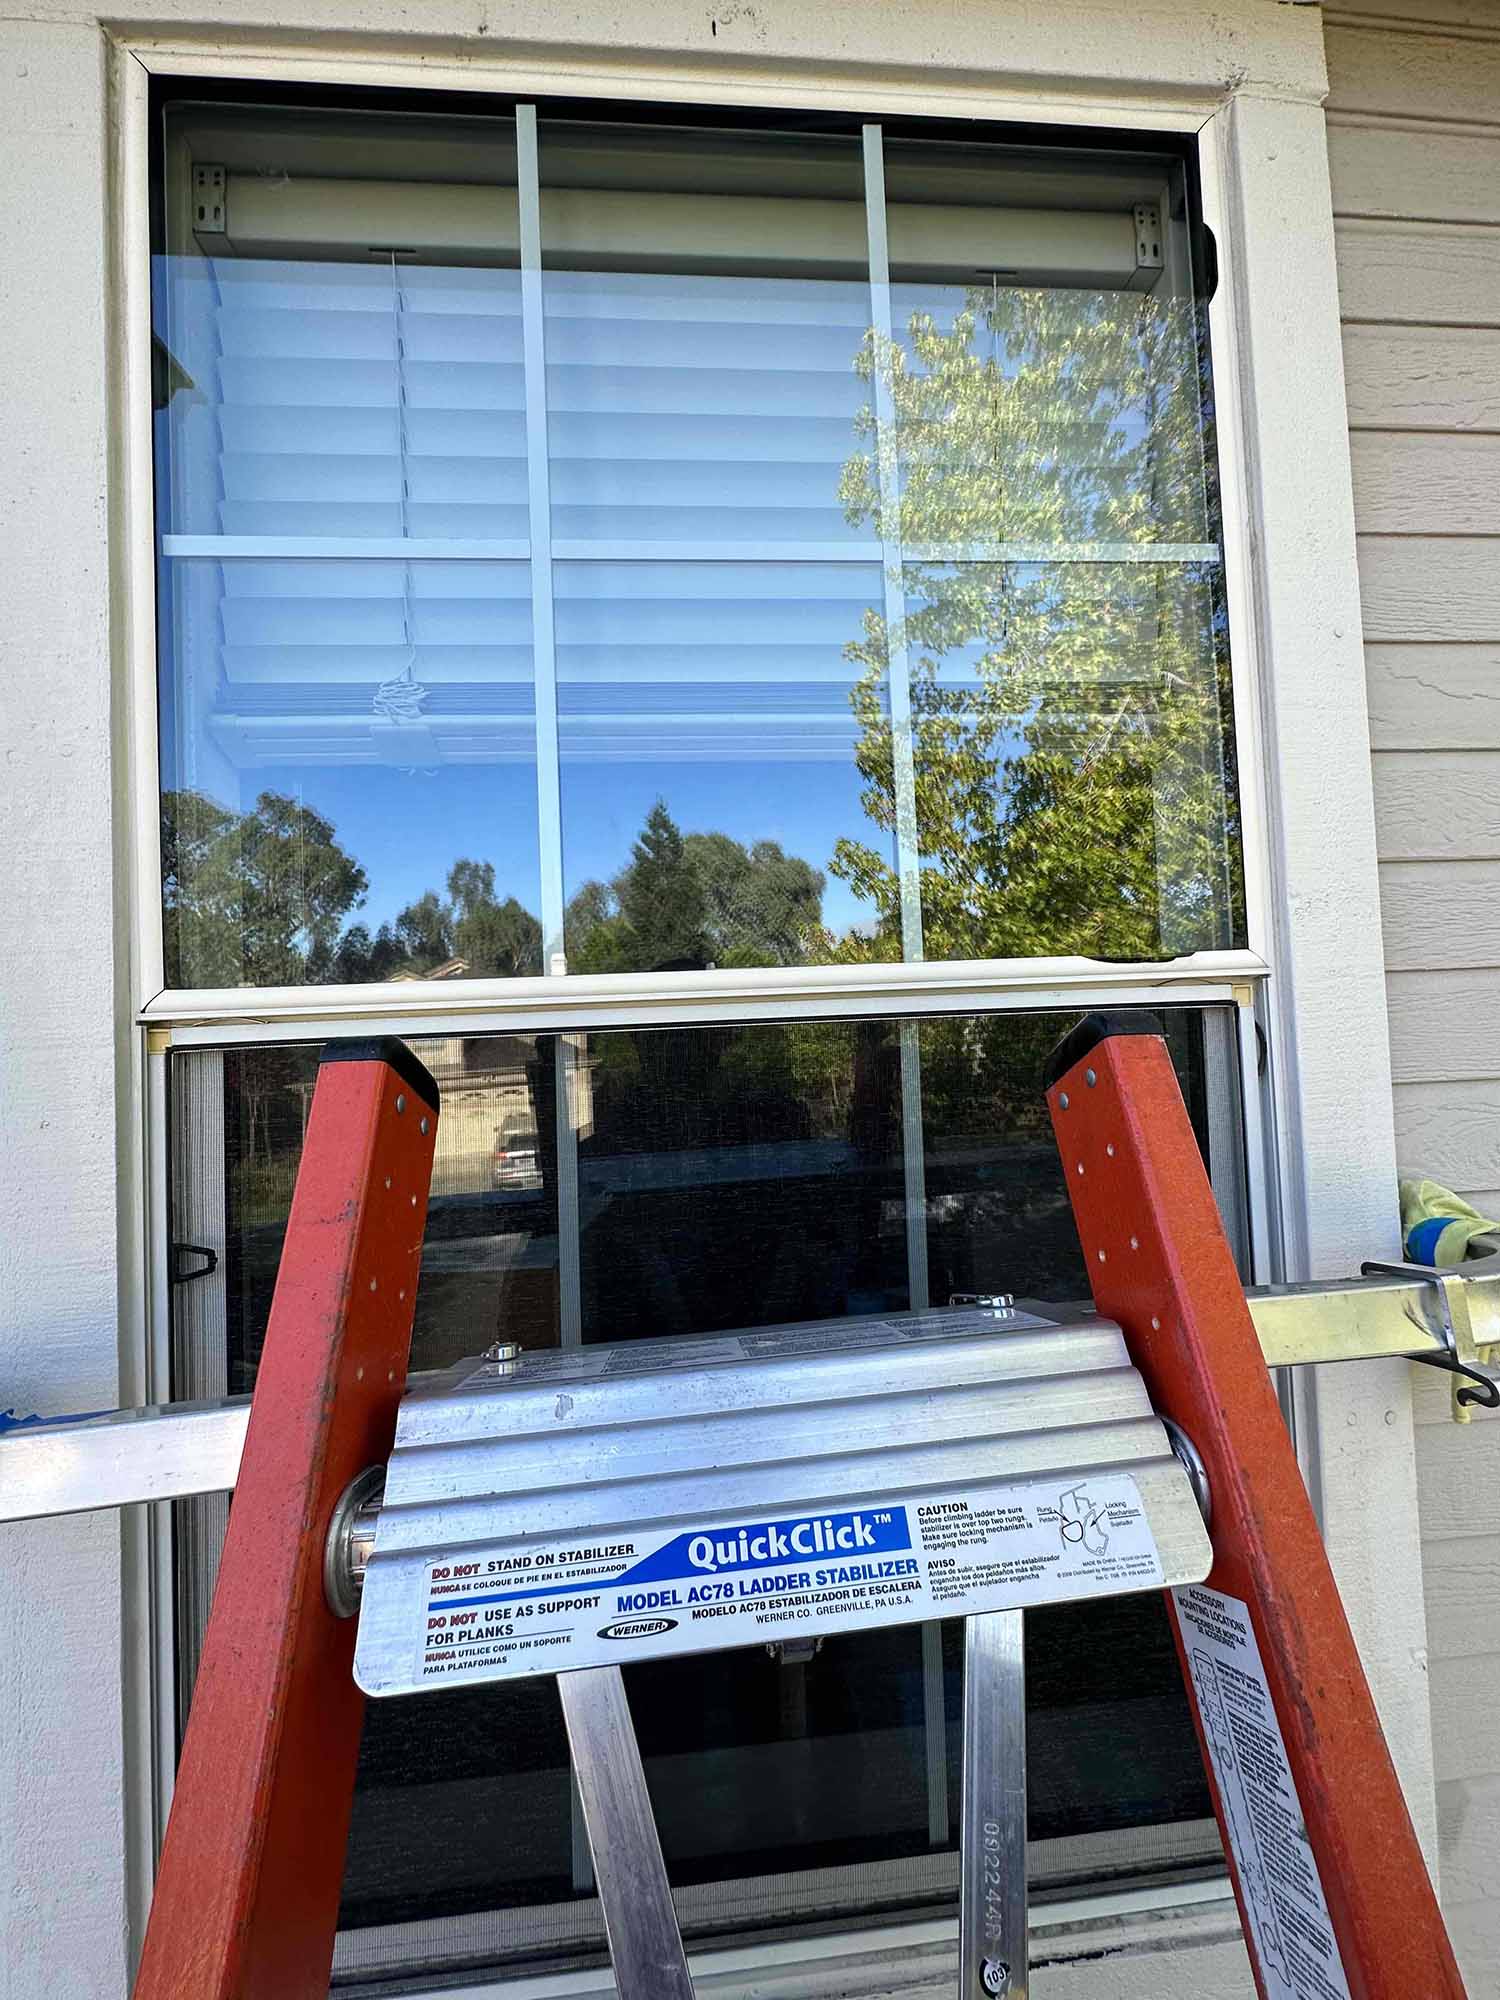 3M Prestige Exterior sun control window film is a great choice for homes in Martinez, CA. Installed by ClimatePro.